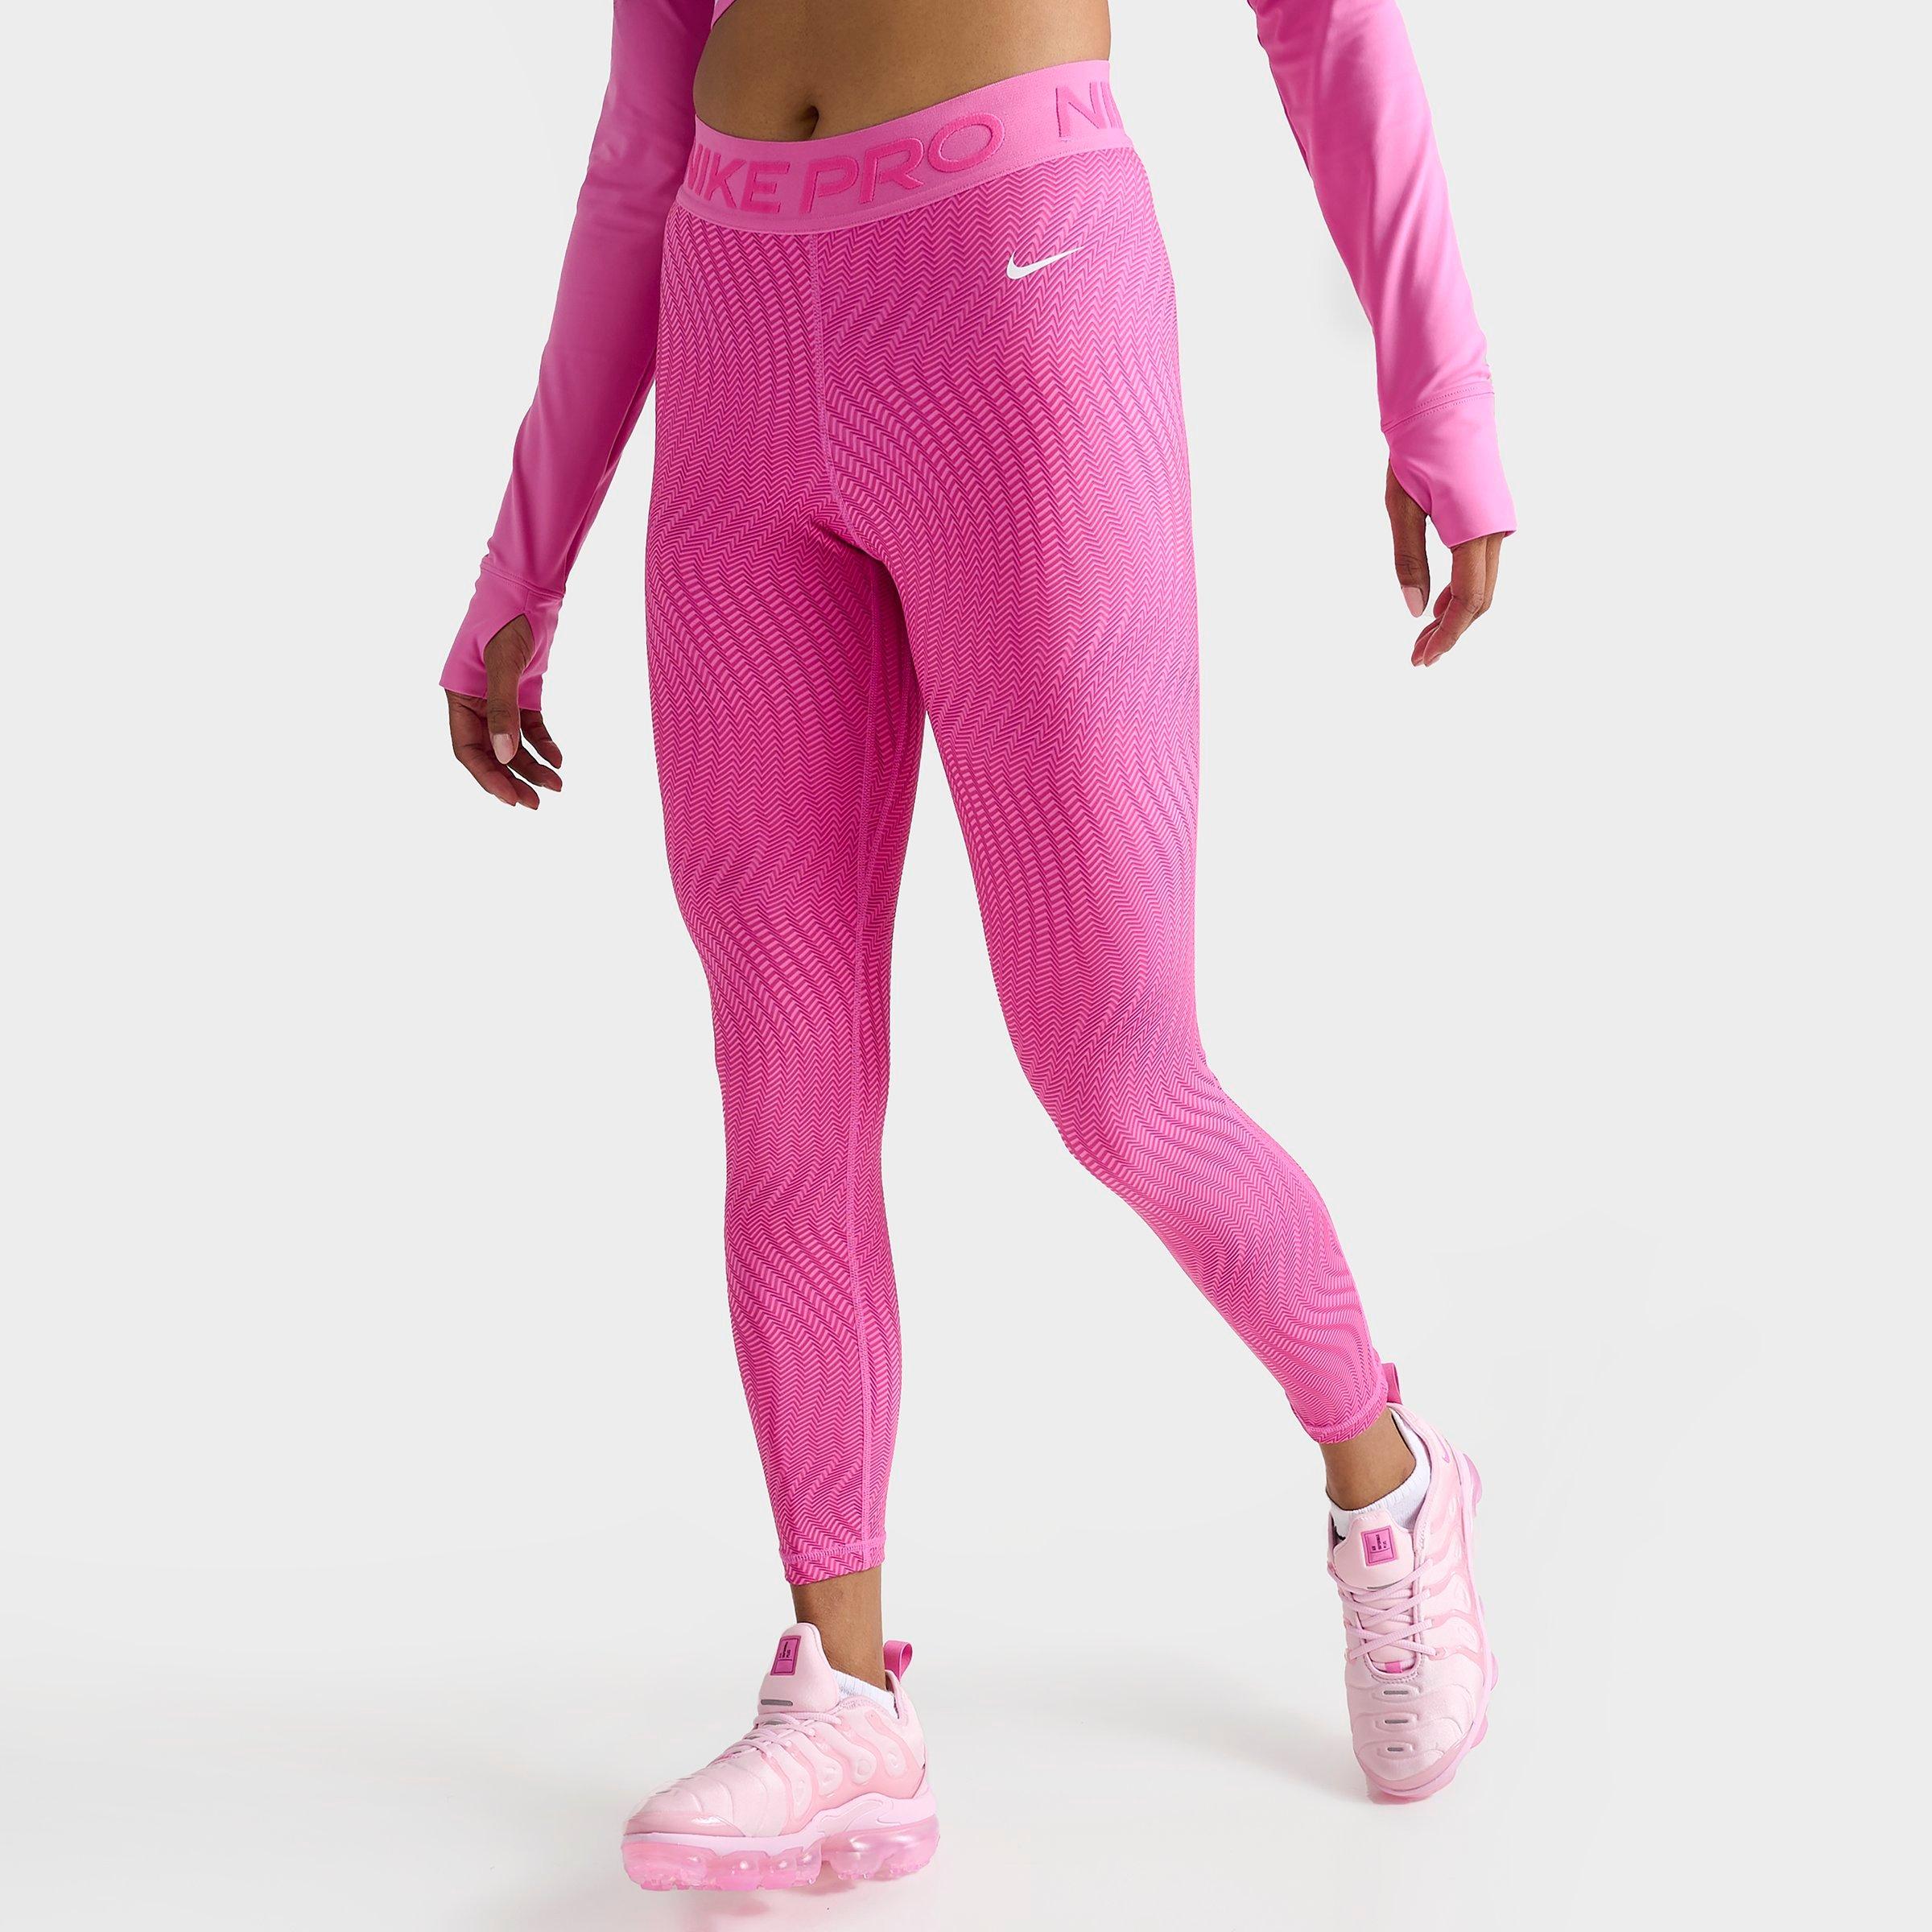 Finish Line Non Pocket Leggings in Indie Pink